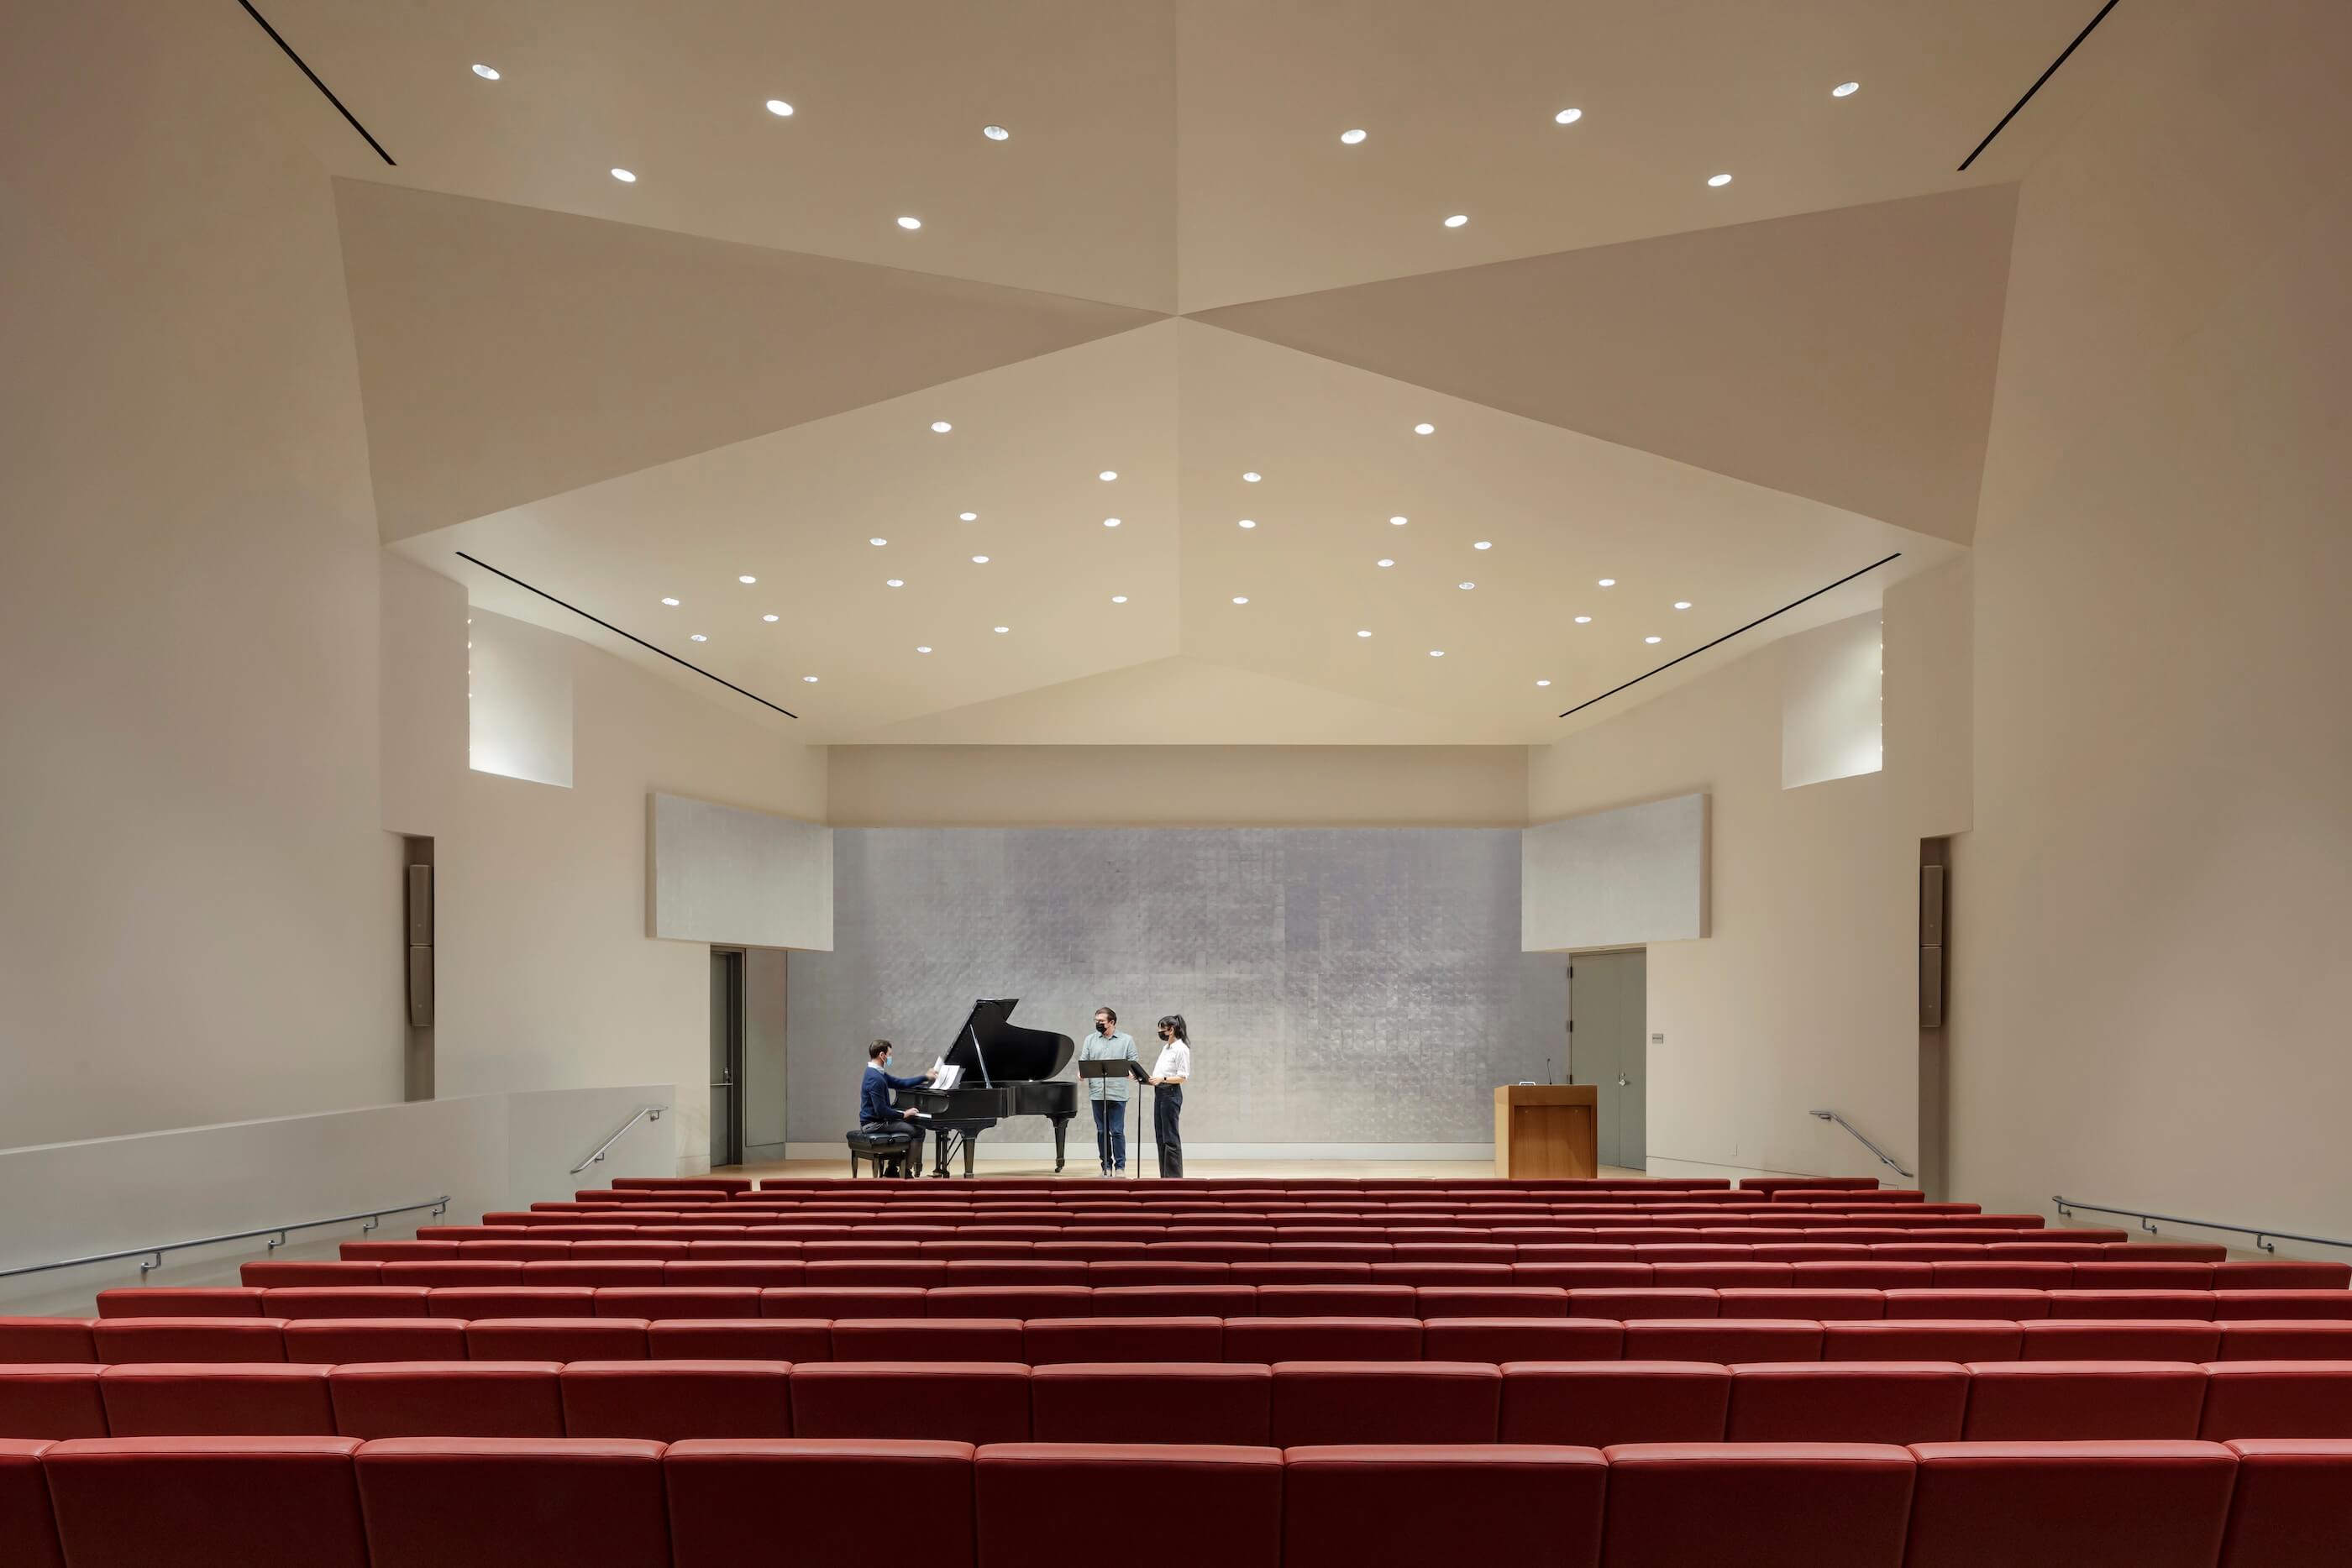 people gather around a piano in a large student auditorium space